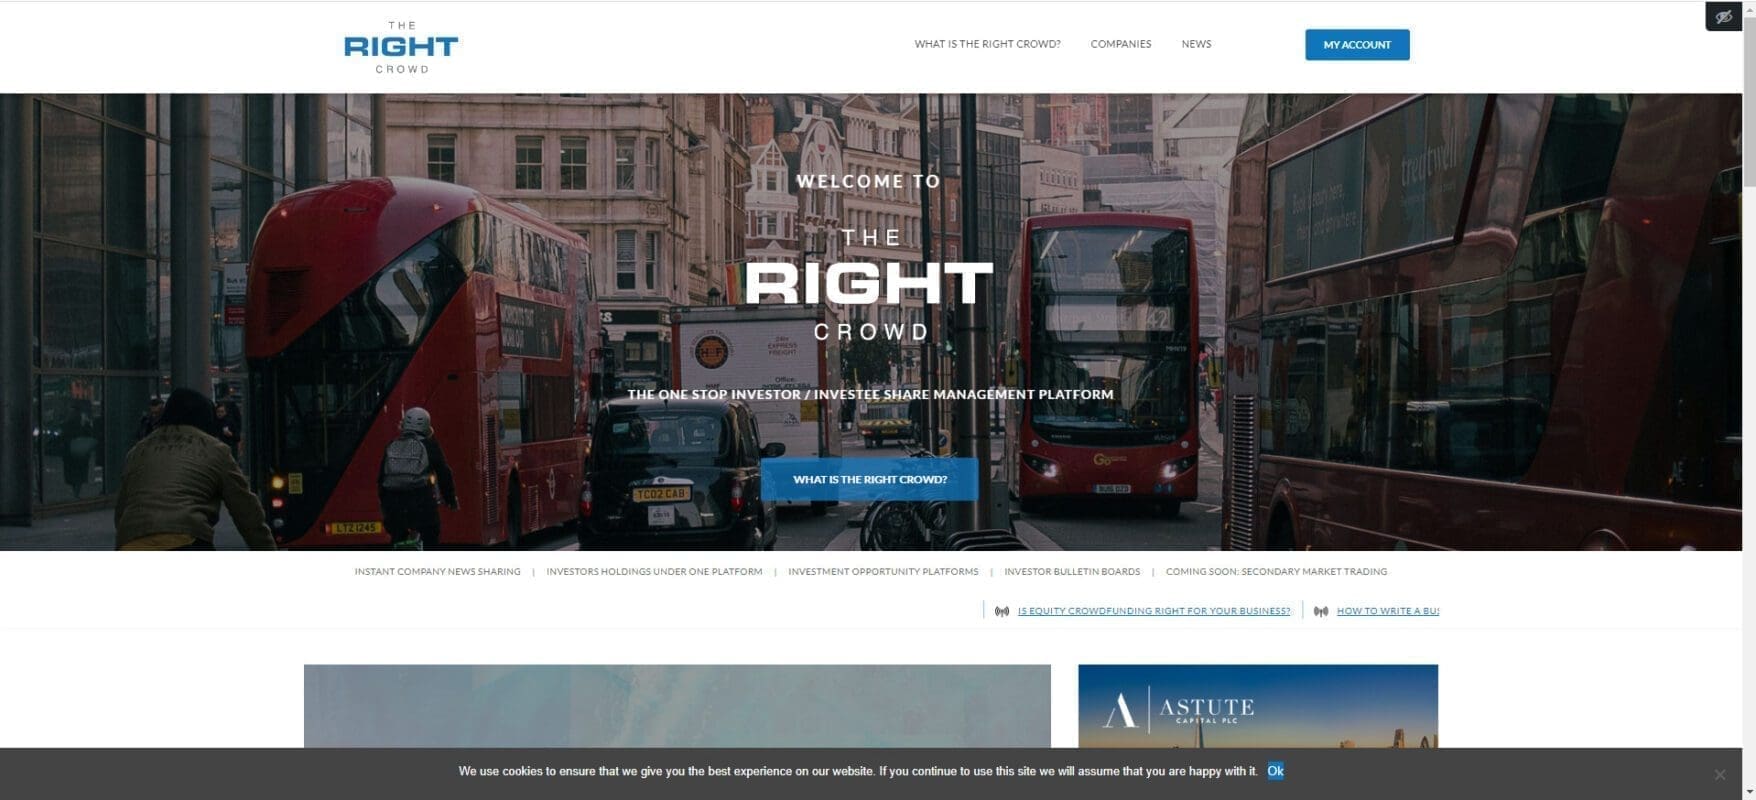 Consultancy Service Website - The Right Crowd